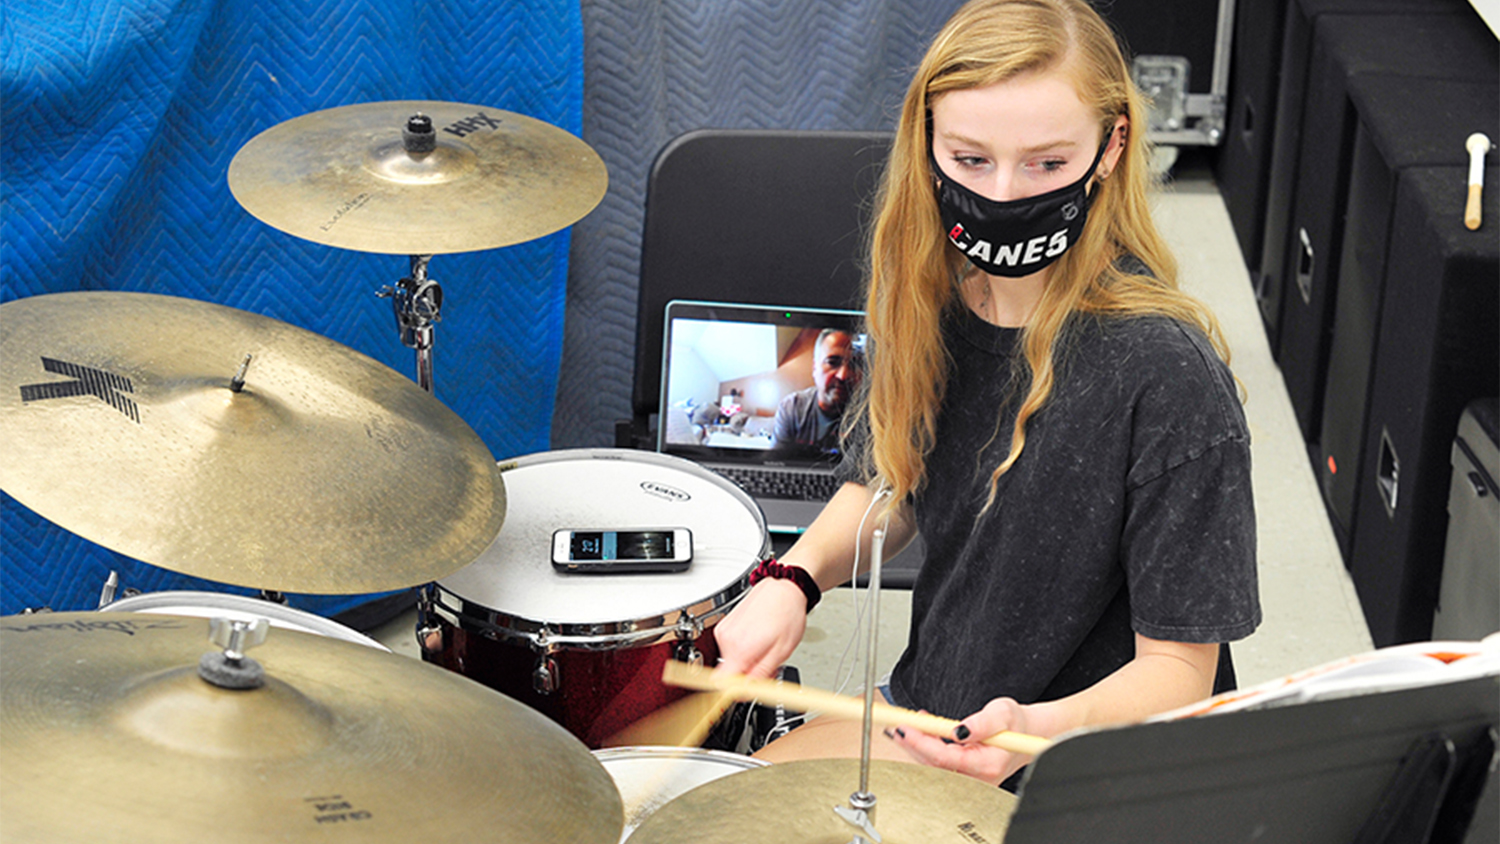 Percussion performance minor AnnE Ford attends her online drum lesson with Dr. Paul Garcia from a practice and recording space set up in Price Music Center for local students to use as needed during the fall 2020 semester of online courses. Photo by Erin Zanders.